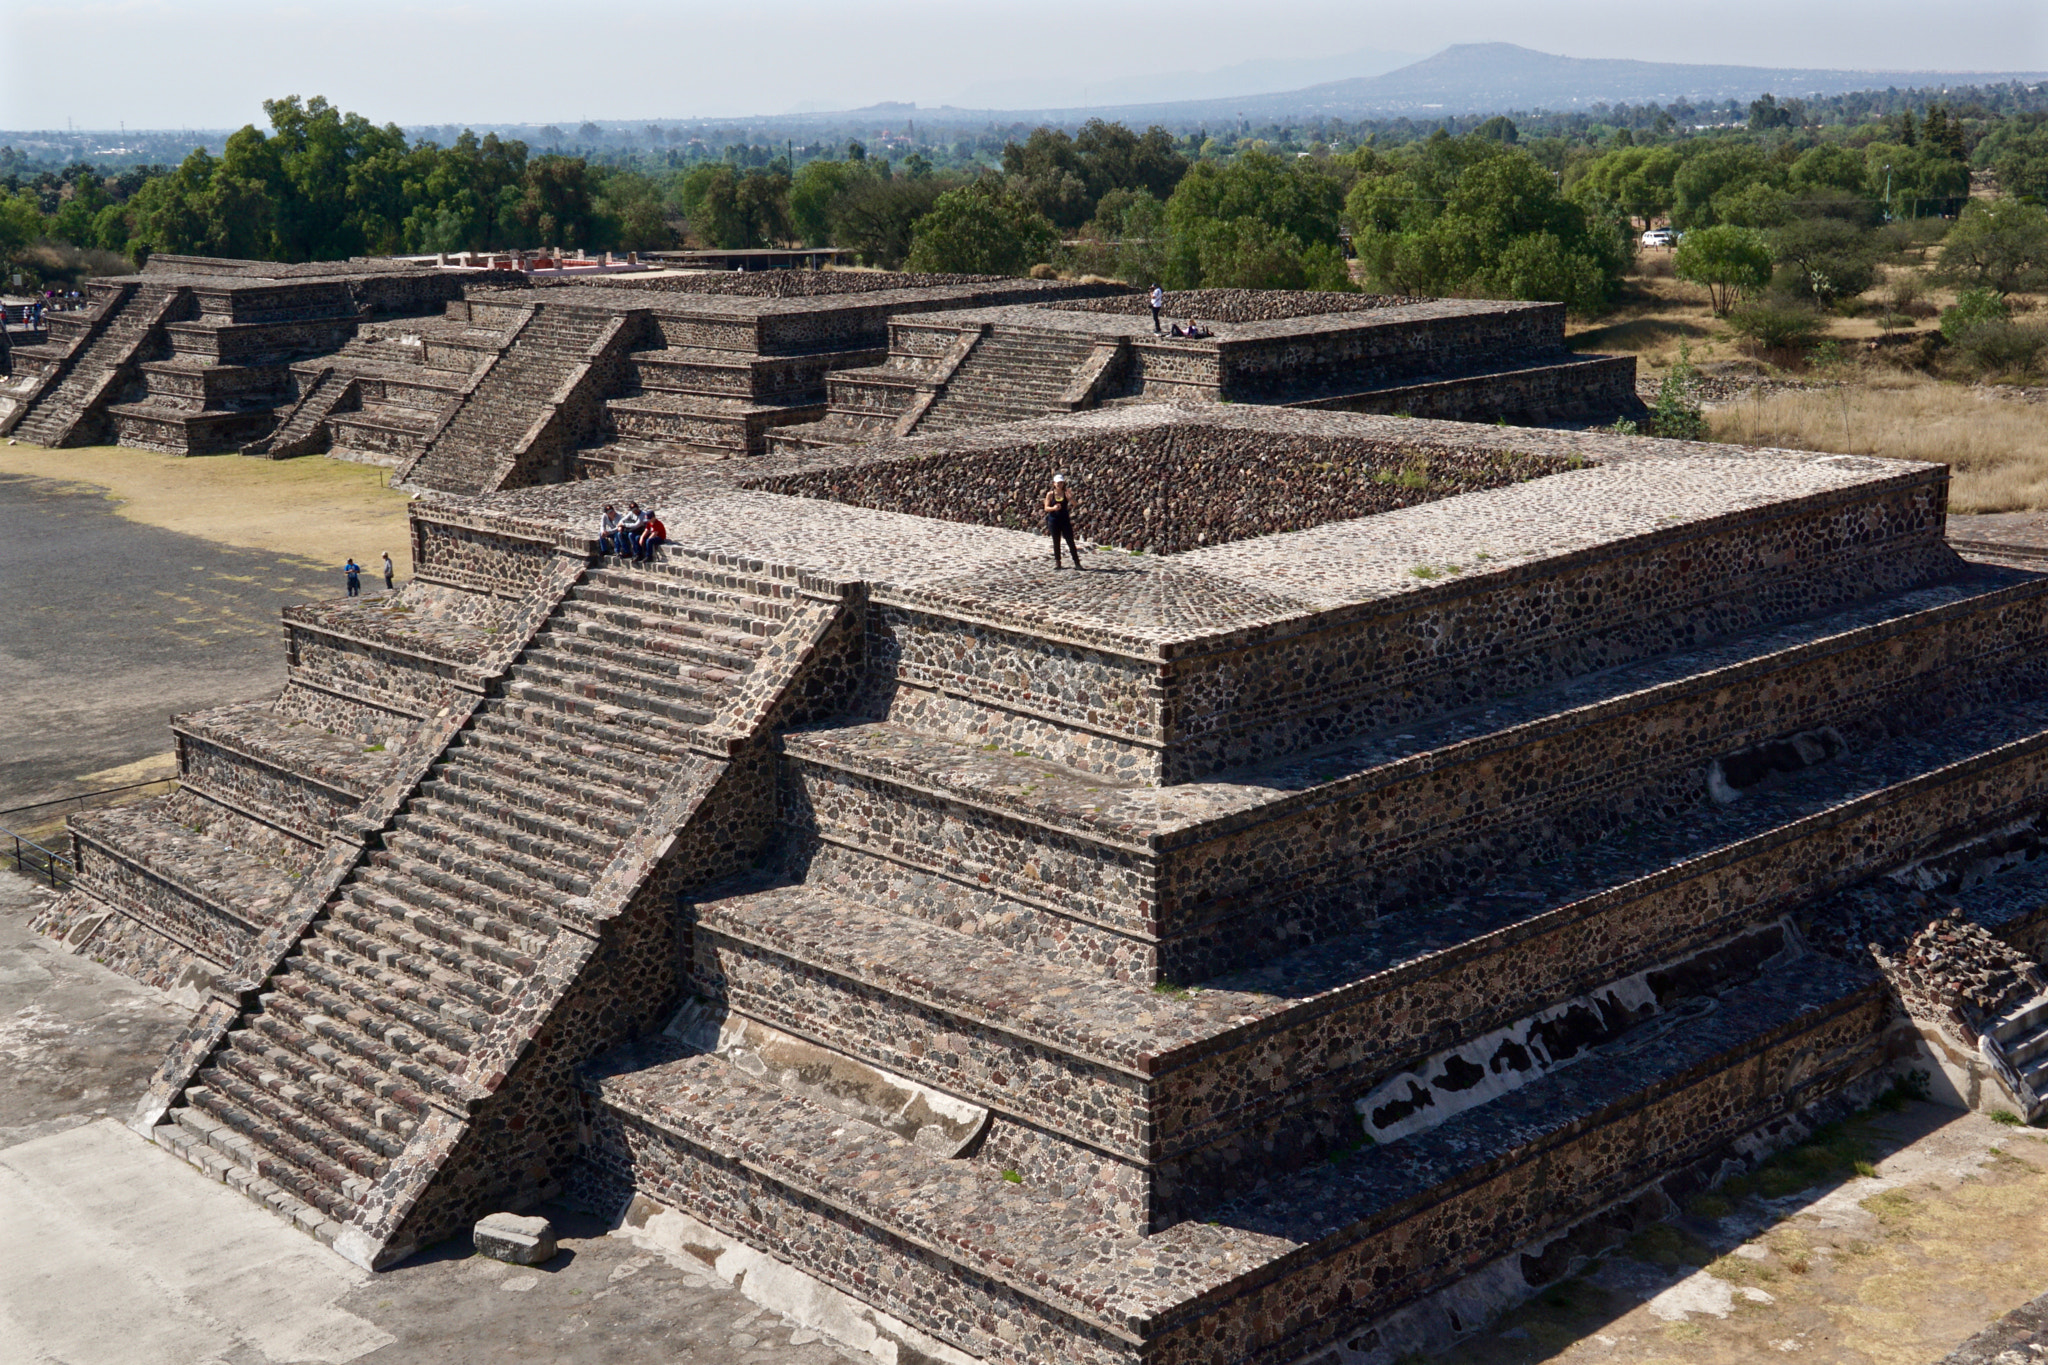 Sony a6000 + Sony E 18-200mm F3.5-6.3 OSS sample photo. Plaza of the moon pyramids in teotihuacan (mexico) photography